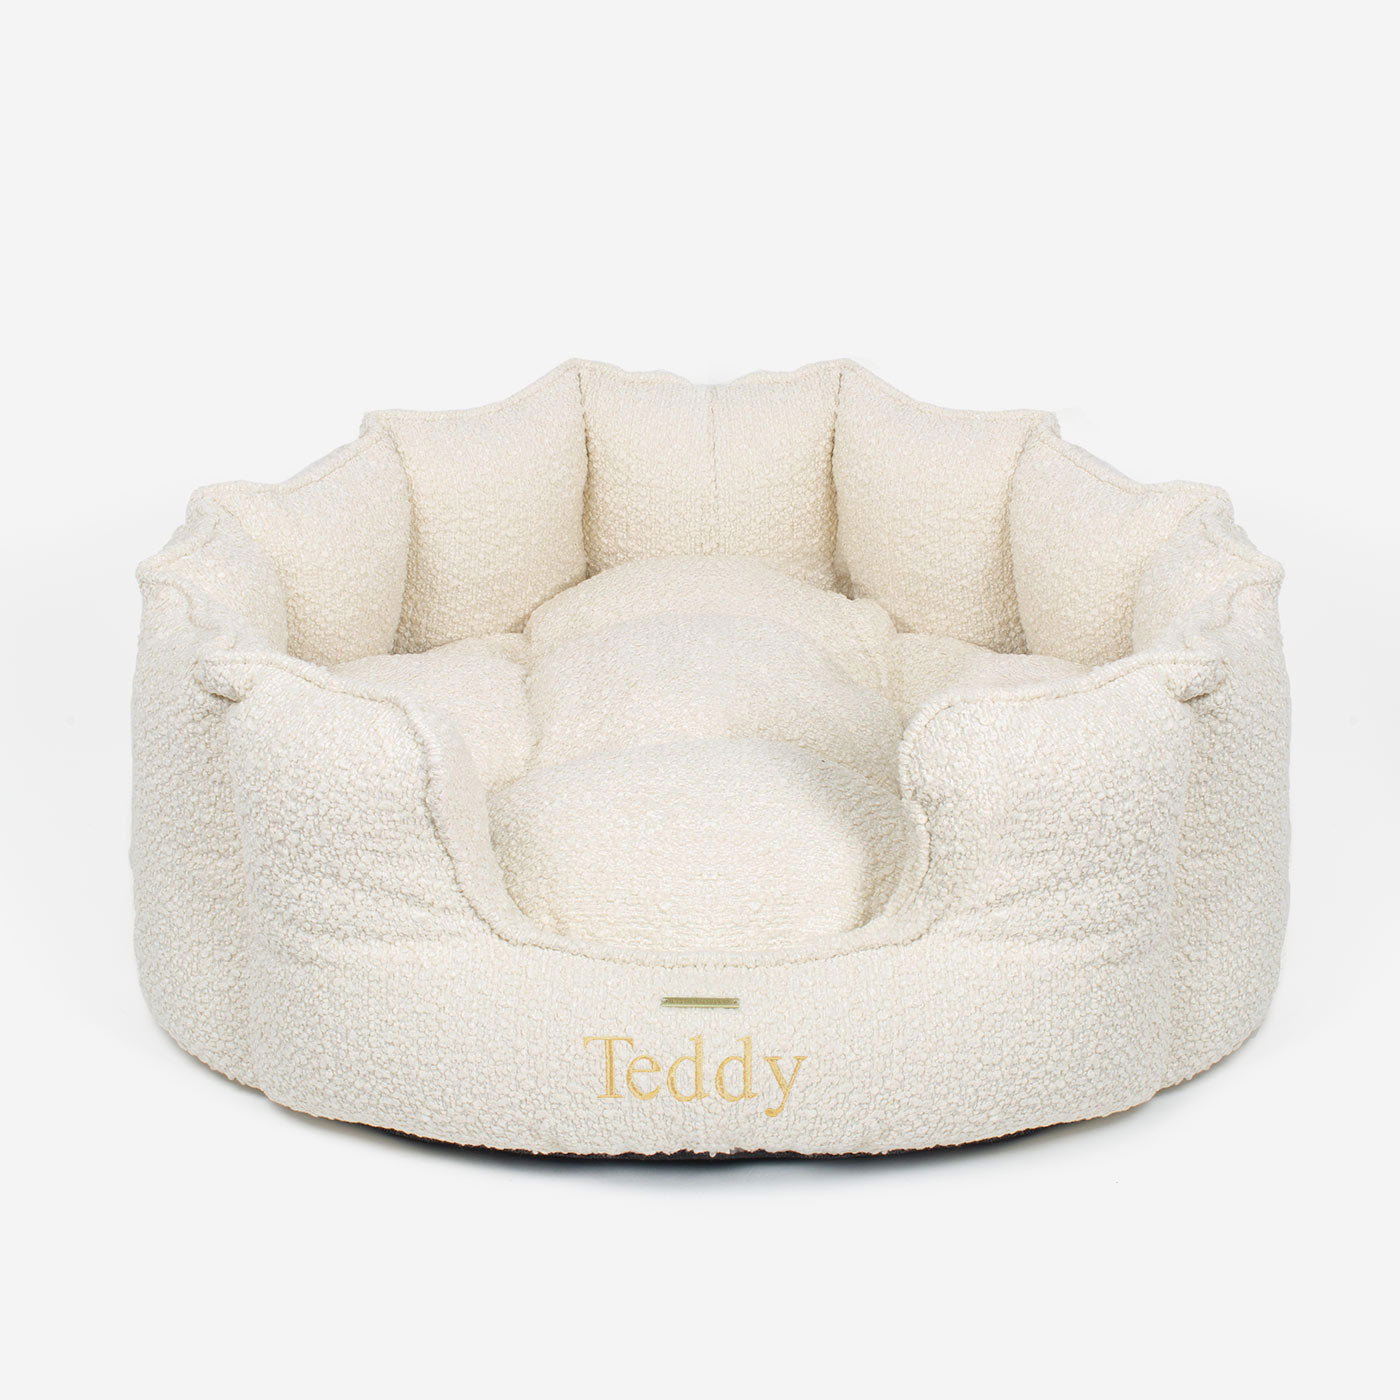 Discover Our Luxurious High Wall Bed For Cats & Kittens, Featuring inner pillow with plush teddy fleece on one side To Craft The Perfect Cat Bed In Stunning Ivory Boucle! Available To Personalise Now at Lords & Labradors 